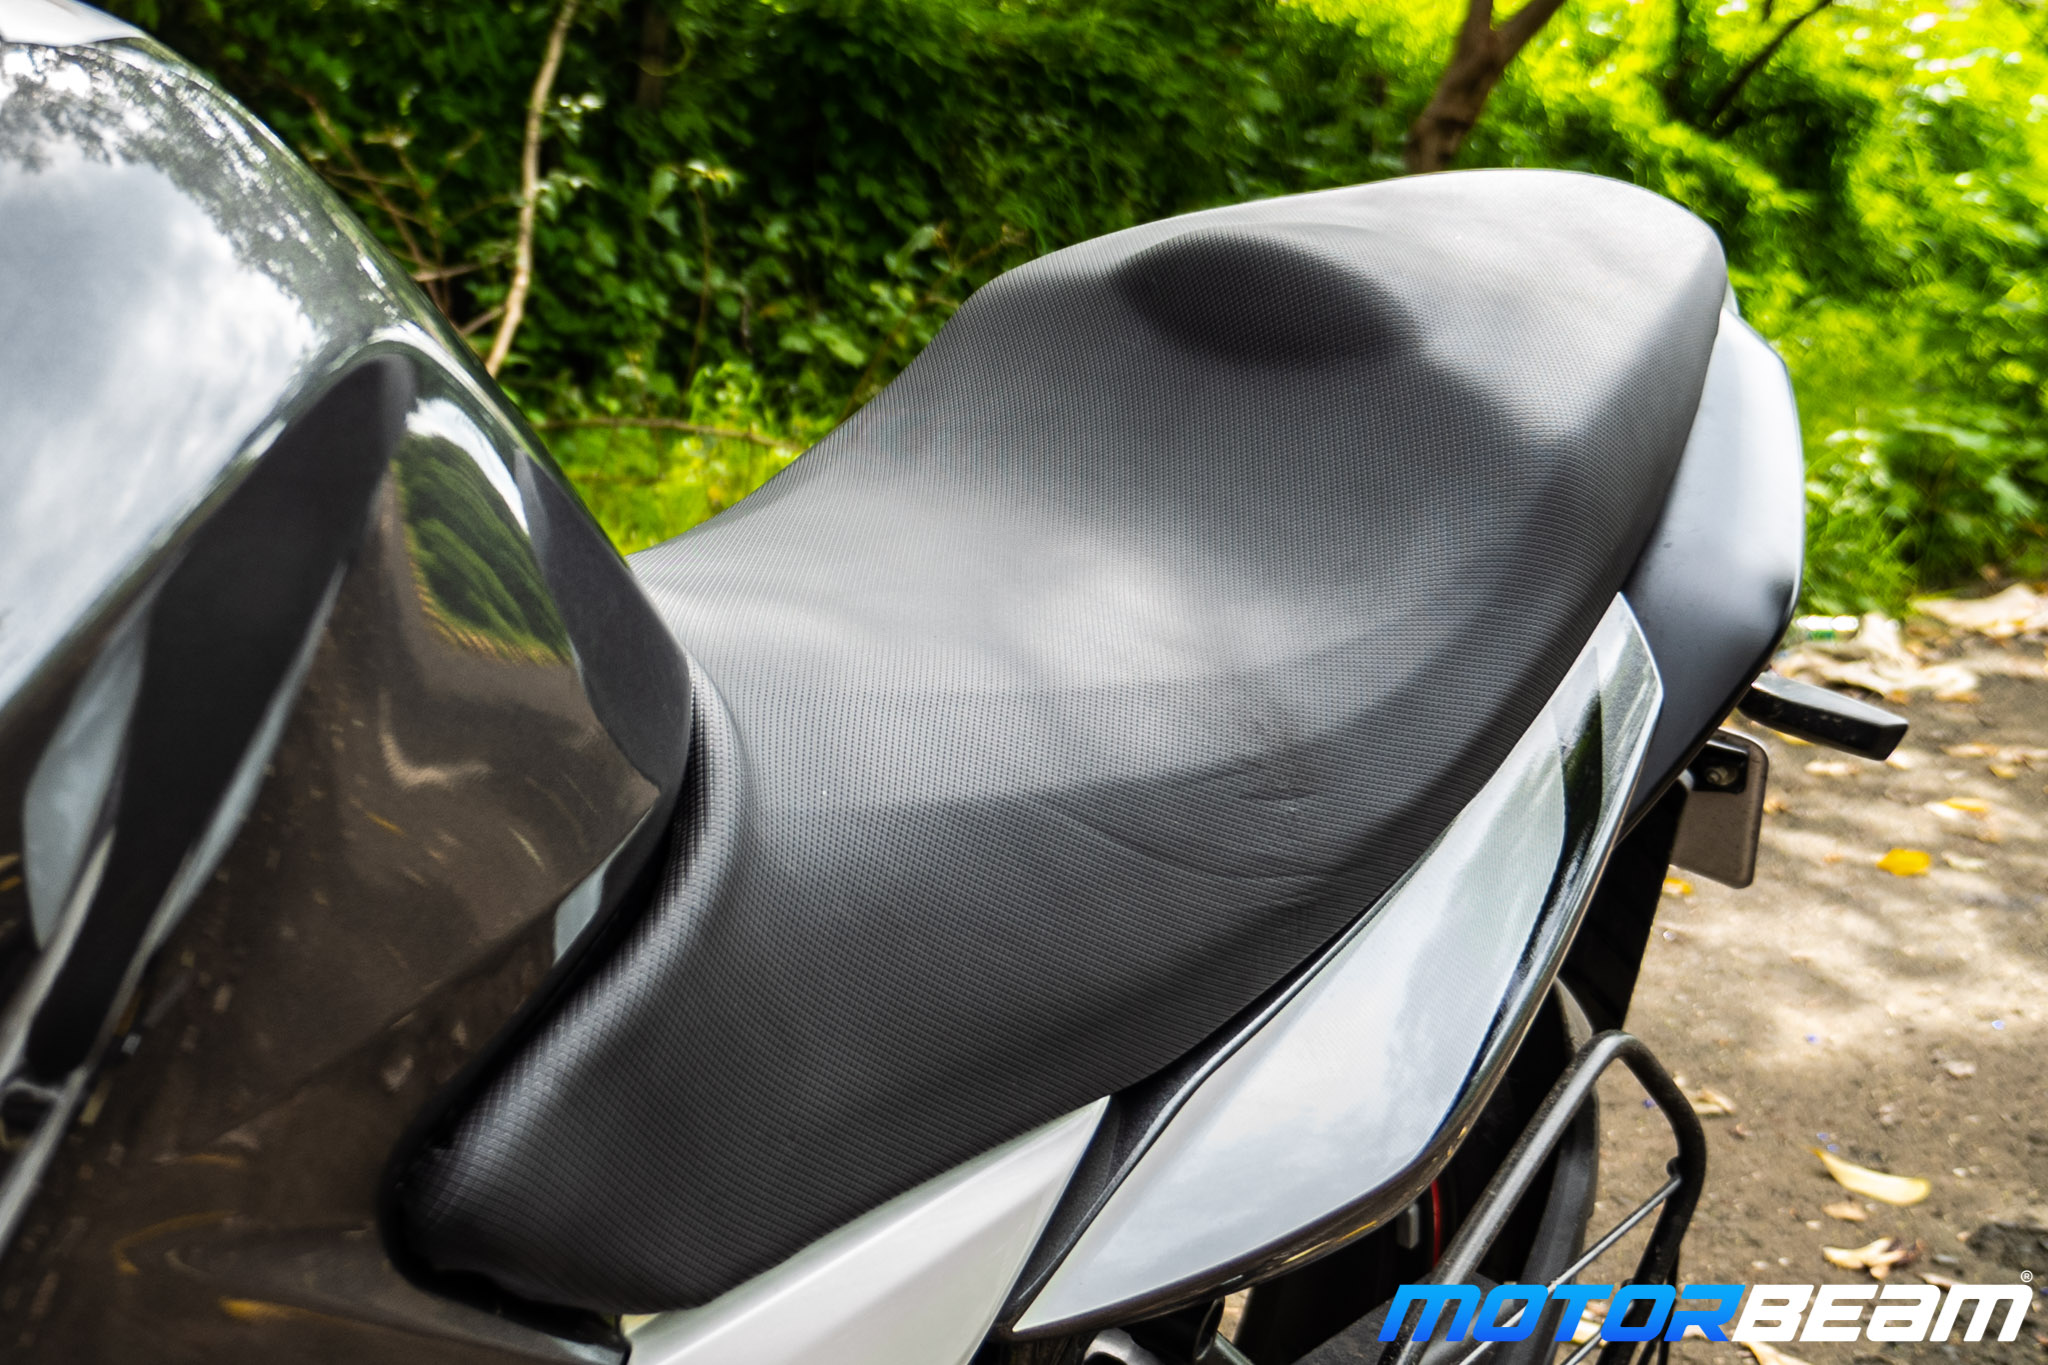 Hero Xtreme 160R Review 27